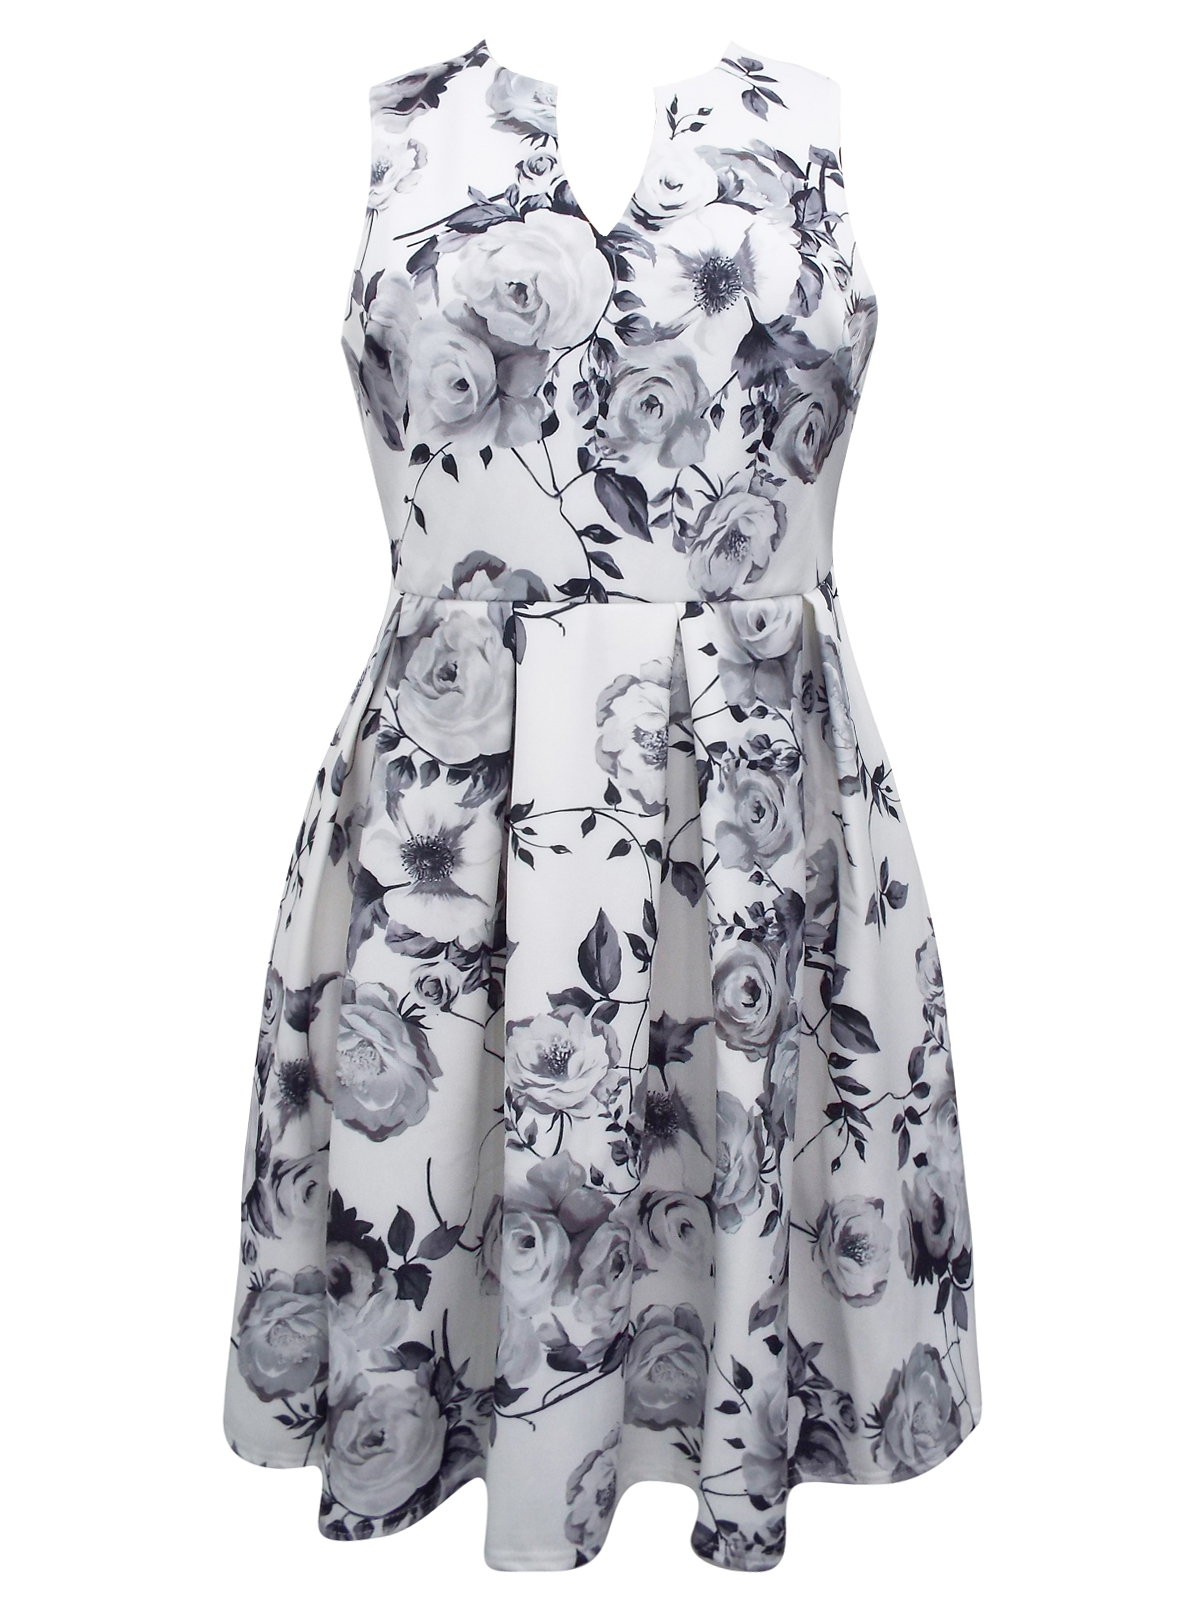 CURVE - - Yours WHITE Floral Print Fit & Flare Dress - Plus Size 16 to ...